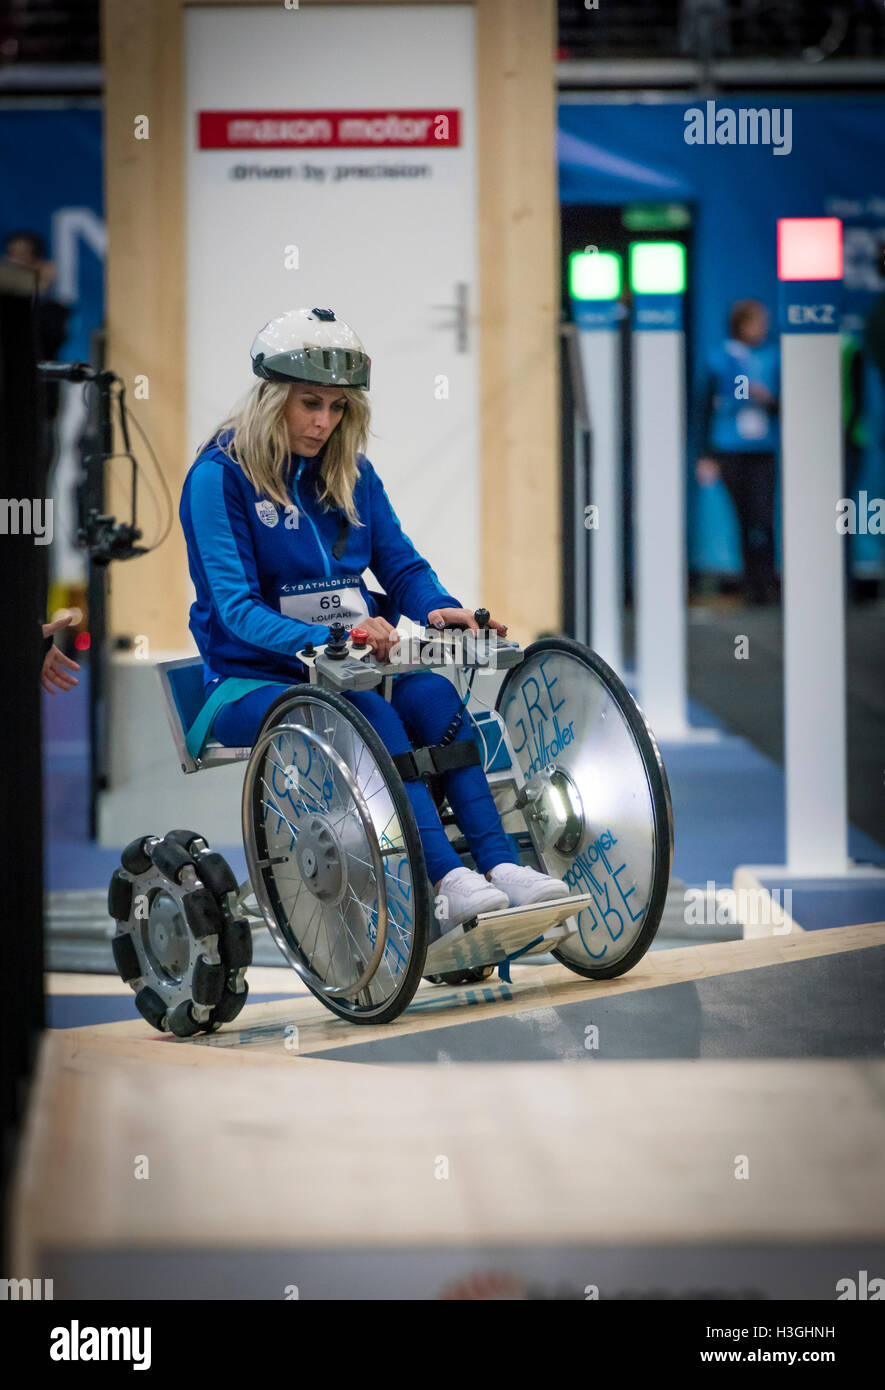 Kloten, Switzerland. 8th Oct, 2016. Kalliopi Loufakil (GRC) passes a wheelchair obstacle course at Cybathlon, the first championship for racing pilots with disabilities using bionic devices at the Swiss Arena in Kloten (Zurich), Switzerland. Organized by the Swiss Federal Institute of Technology (ETH) in Zurich, Cybathlon brings together interdisciplinary teams of bio-engineers, scientists and athletes with physical disabilities to compete in solving everyday tasks and to demonstrate how technology enables them to overcome physical limitations of their body. Credit:  Erik Tham/Alamy Live News Stock Photo